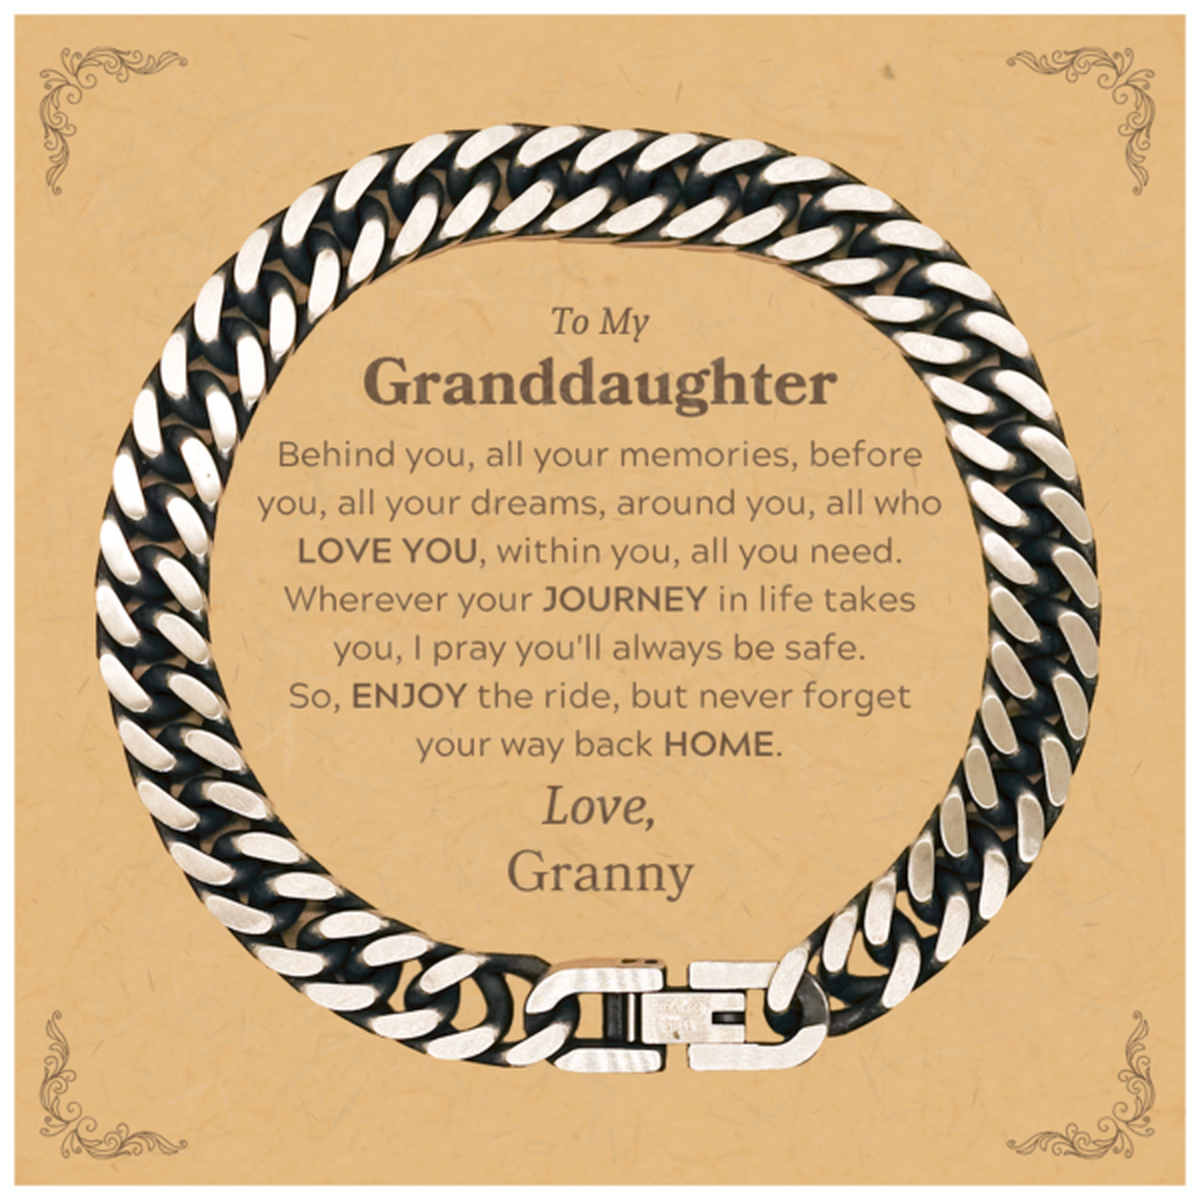 To My Granddaughter Graduation Gifts from Granny, Granddaughter Cuban Link Chain Bracelet Christmas Birthday Gifts for Granddaughter Behind you, all your memories, before you, all your dreams. Love, Granny